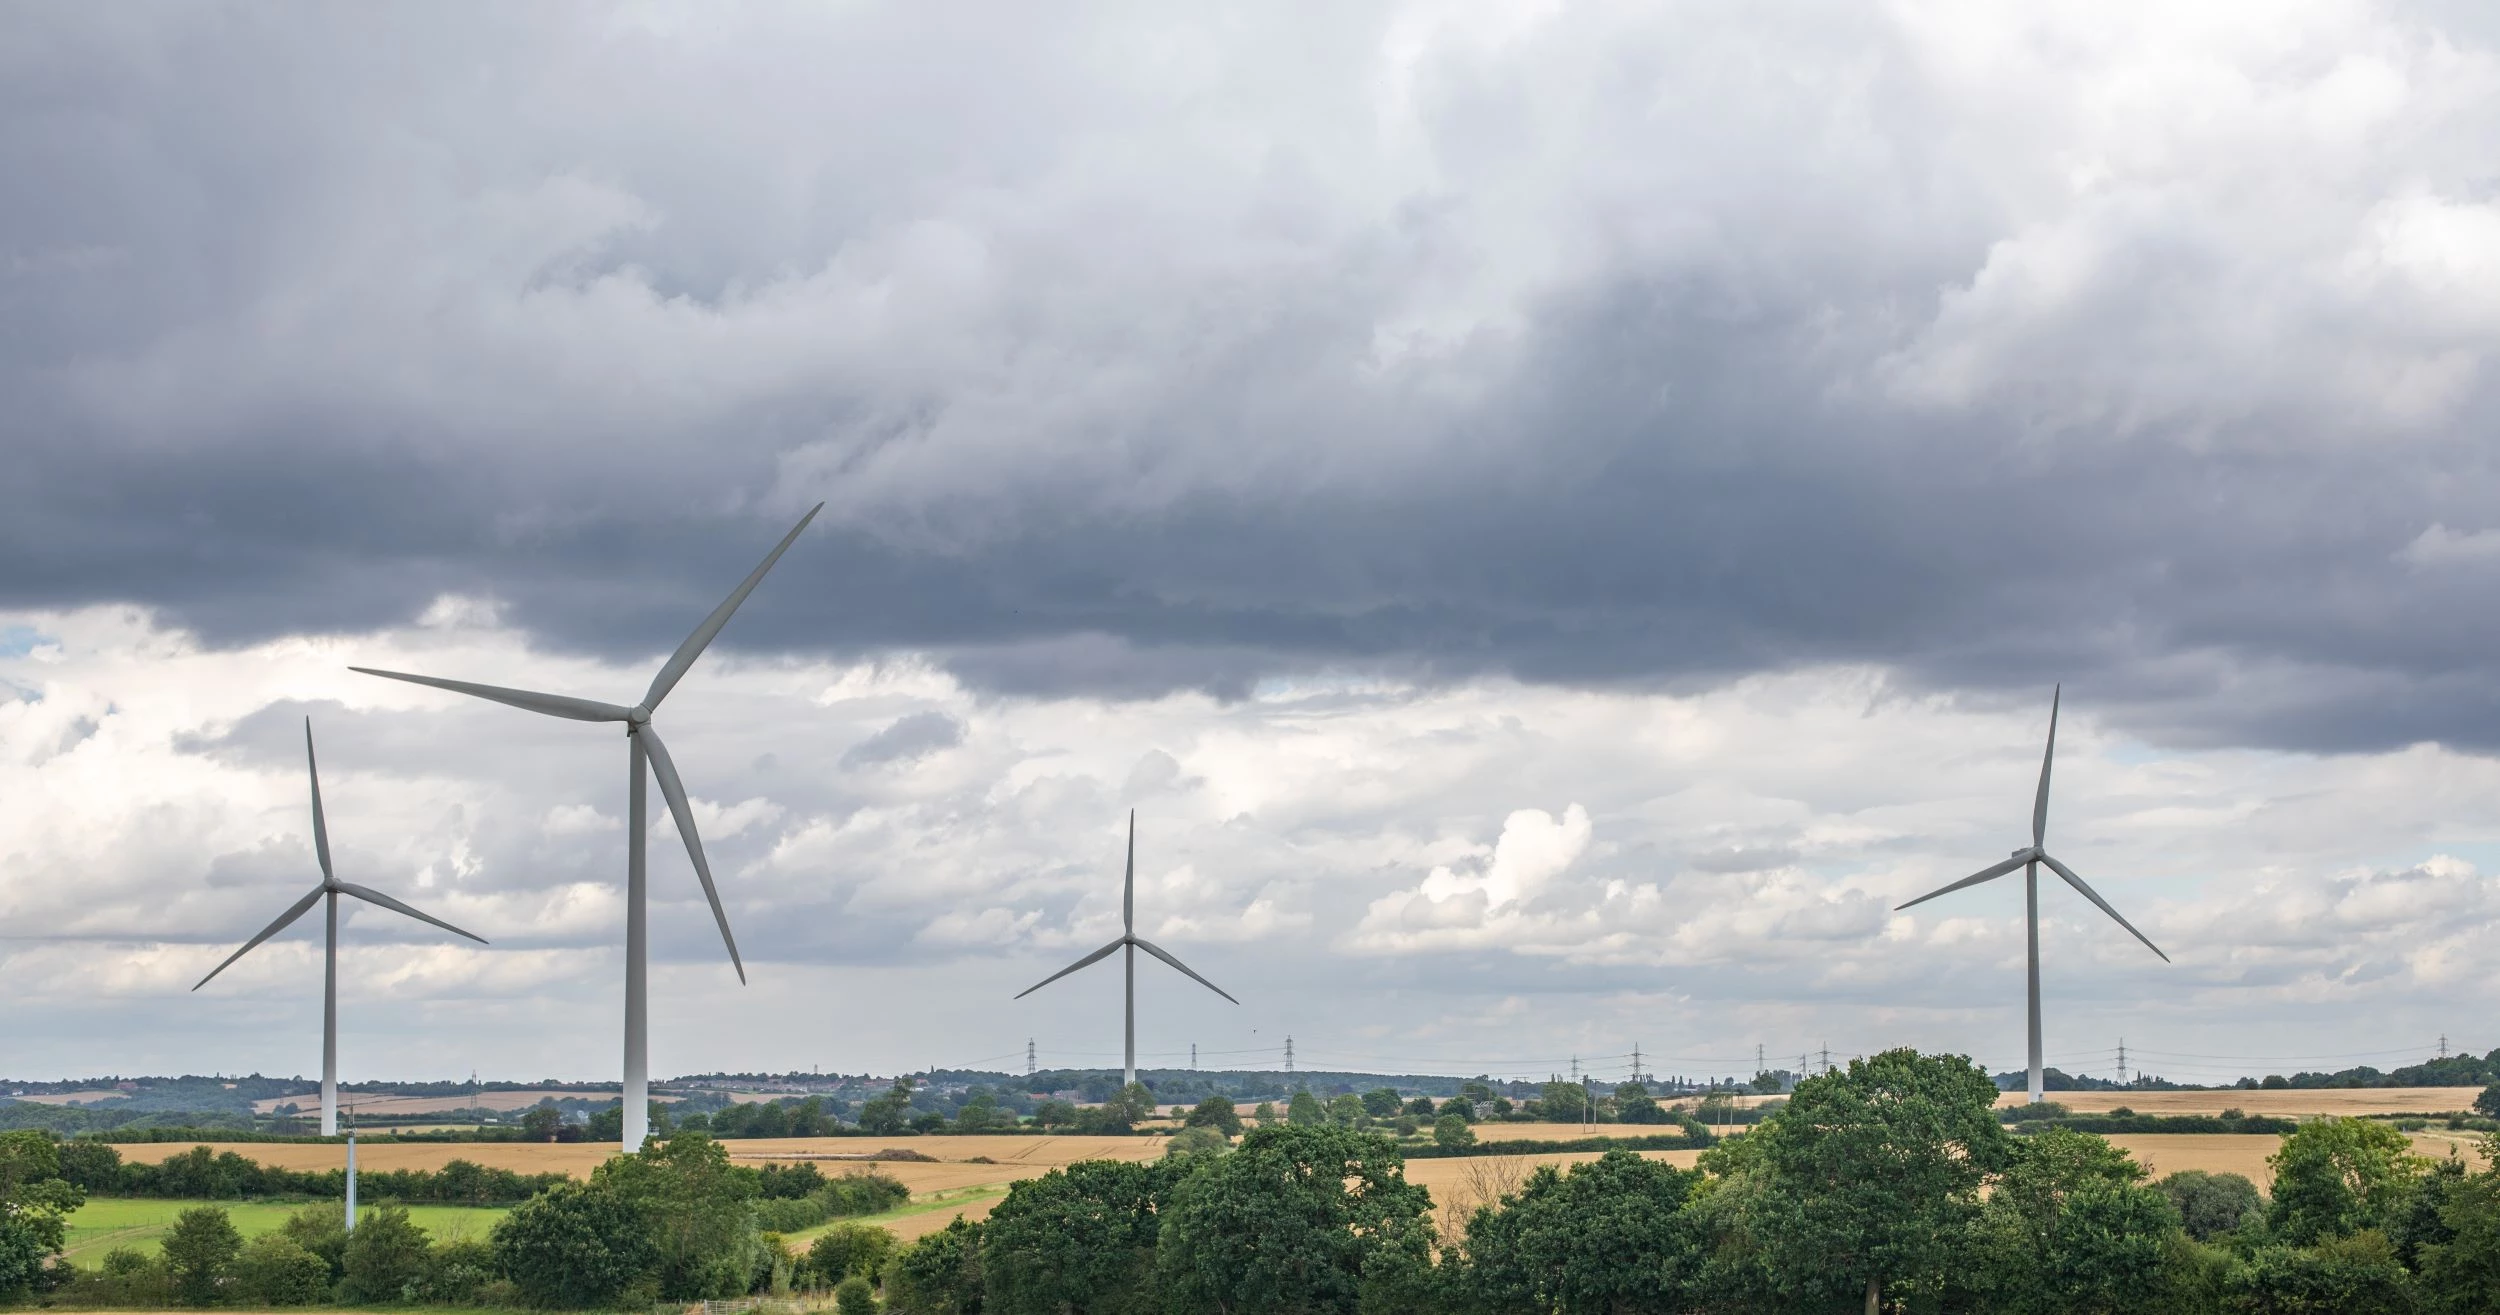 Banks Renewables' Penny Hill Wind Farm in South Yorkshire